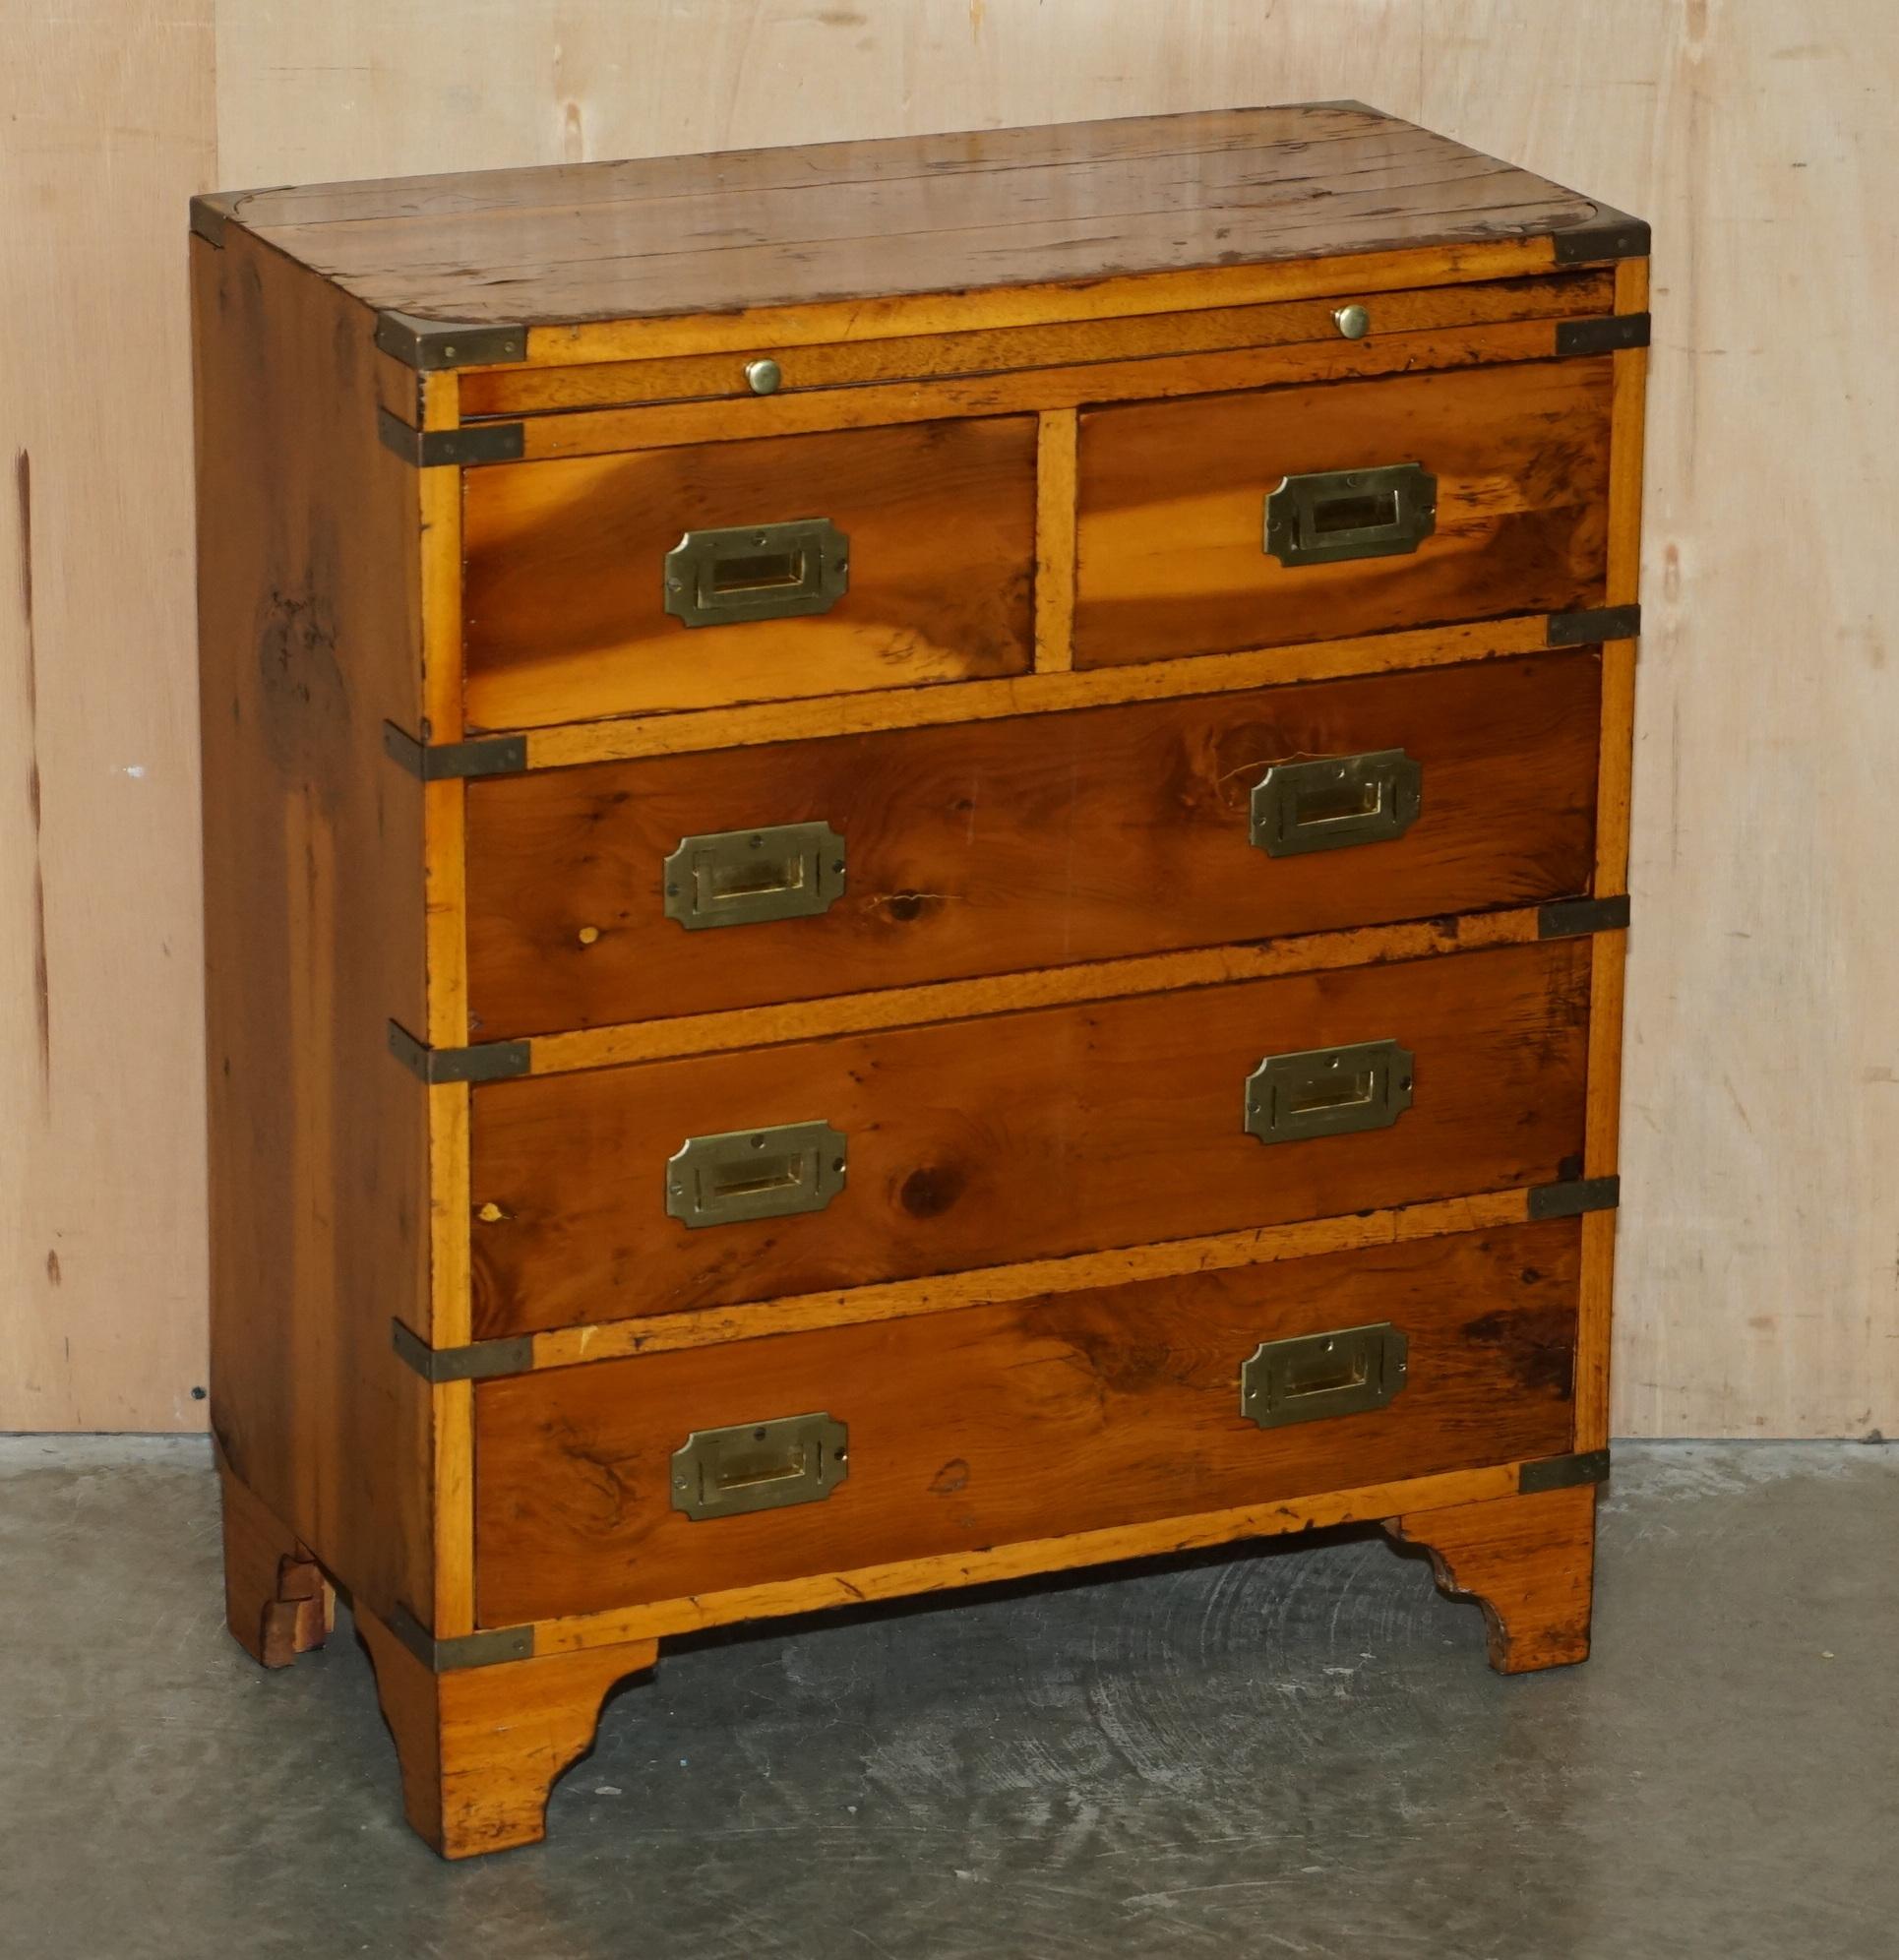 Campaign PAIR OF DISTRESSED MILITARY CAMPAIGN BURR YEW WOOD SIDE TABLES WiTH DRAWERS TRAY For Sale